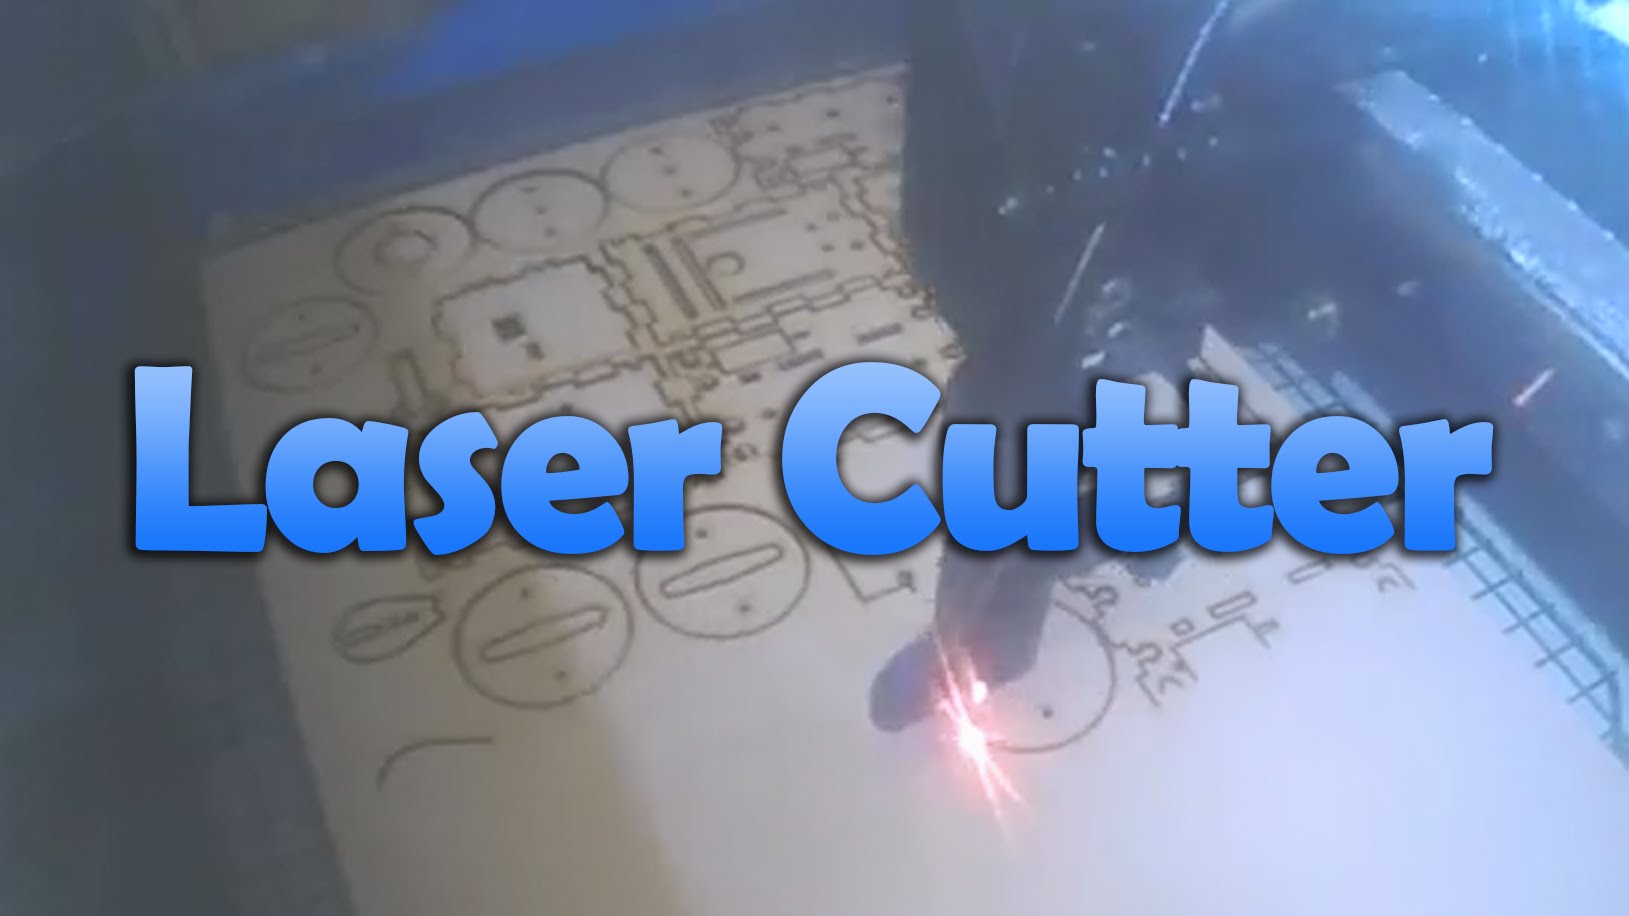 On YouTube: Introduction to the Laser Cutter